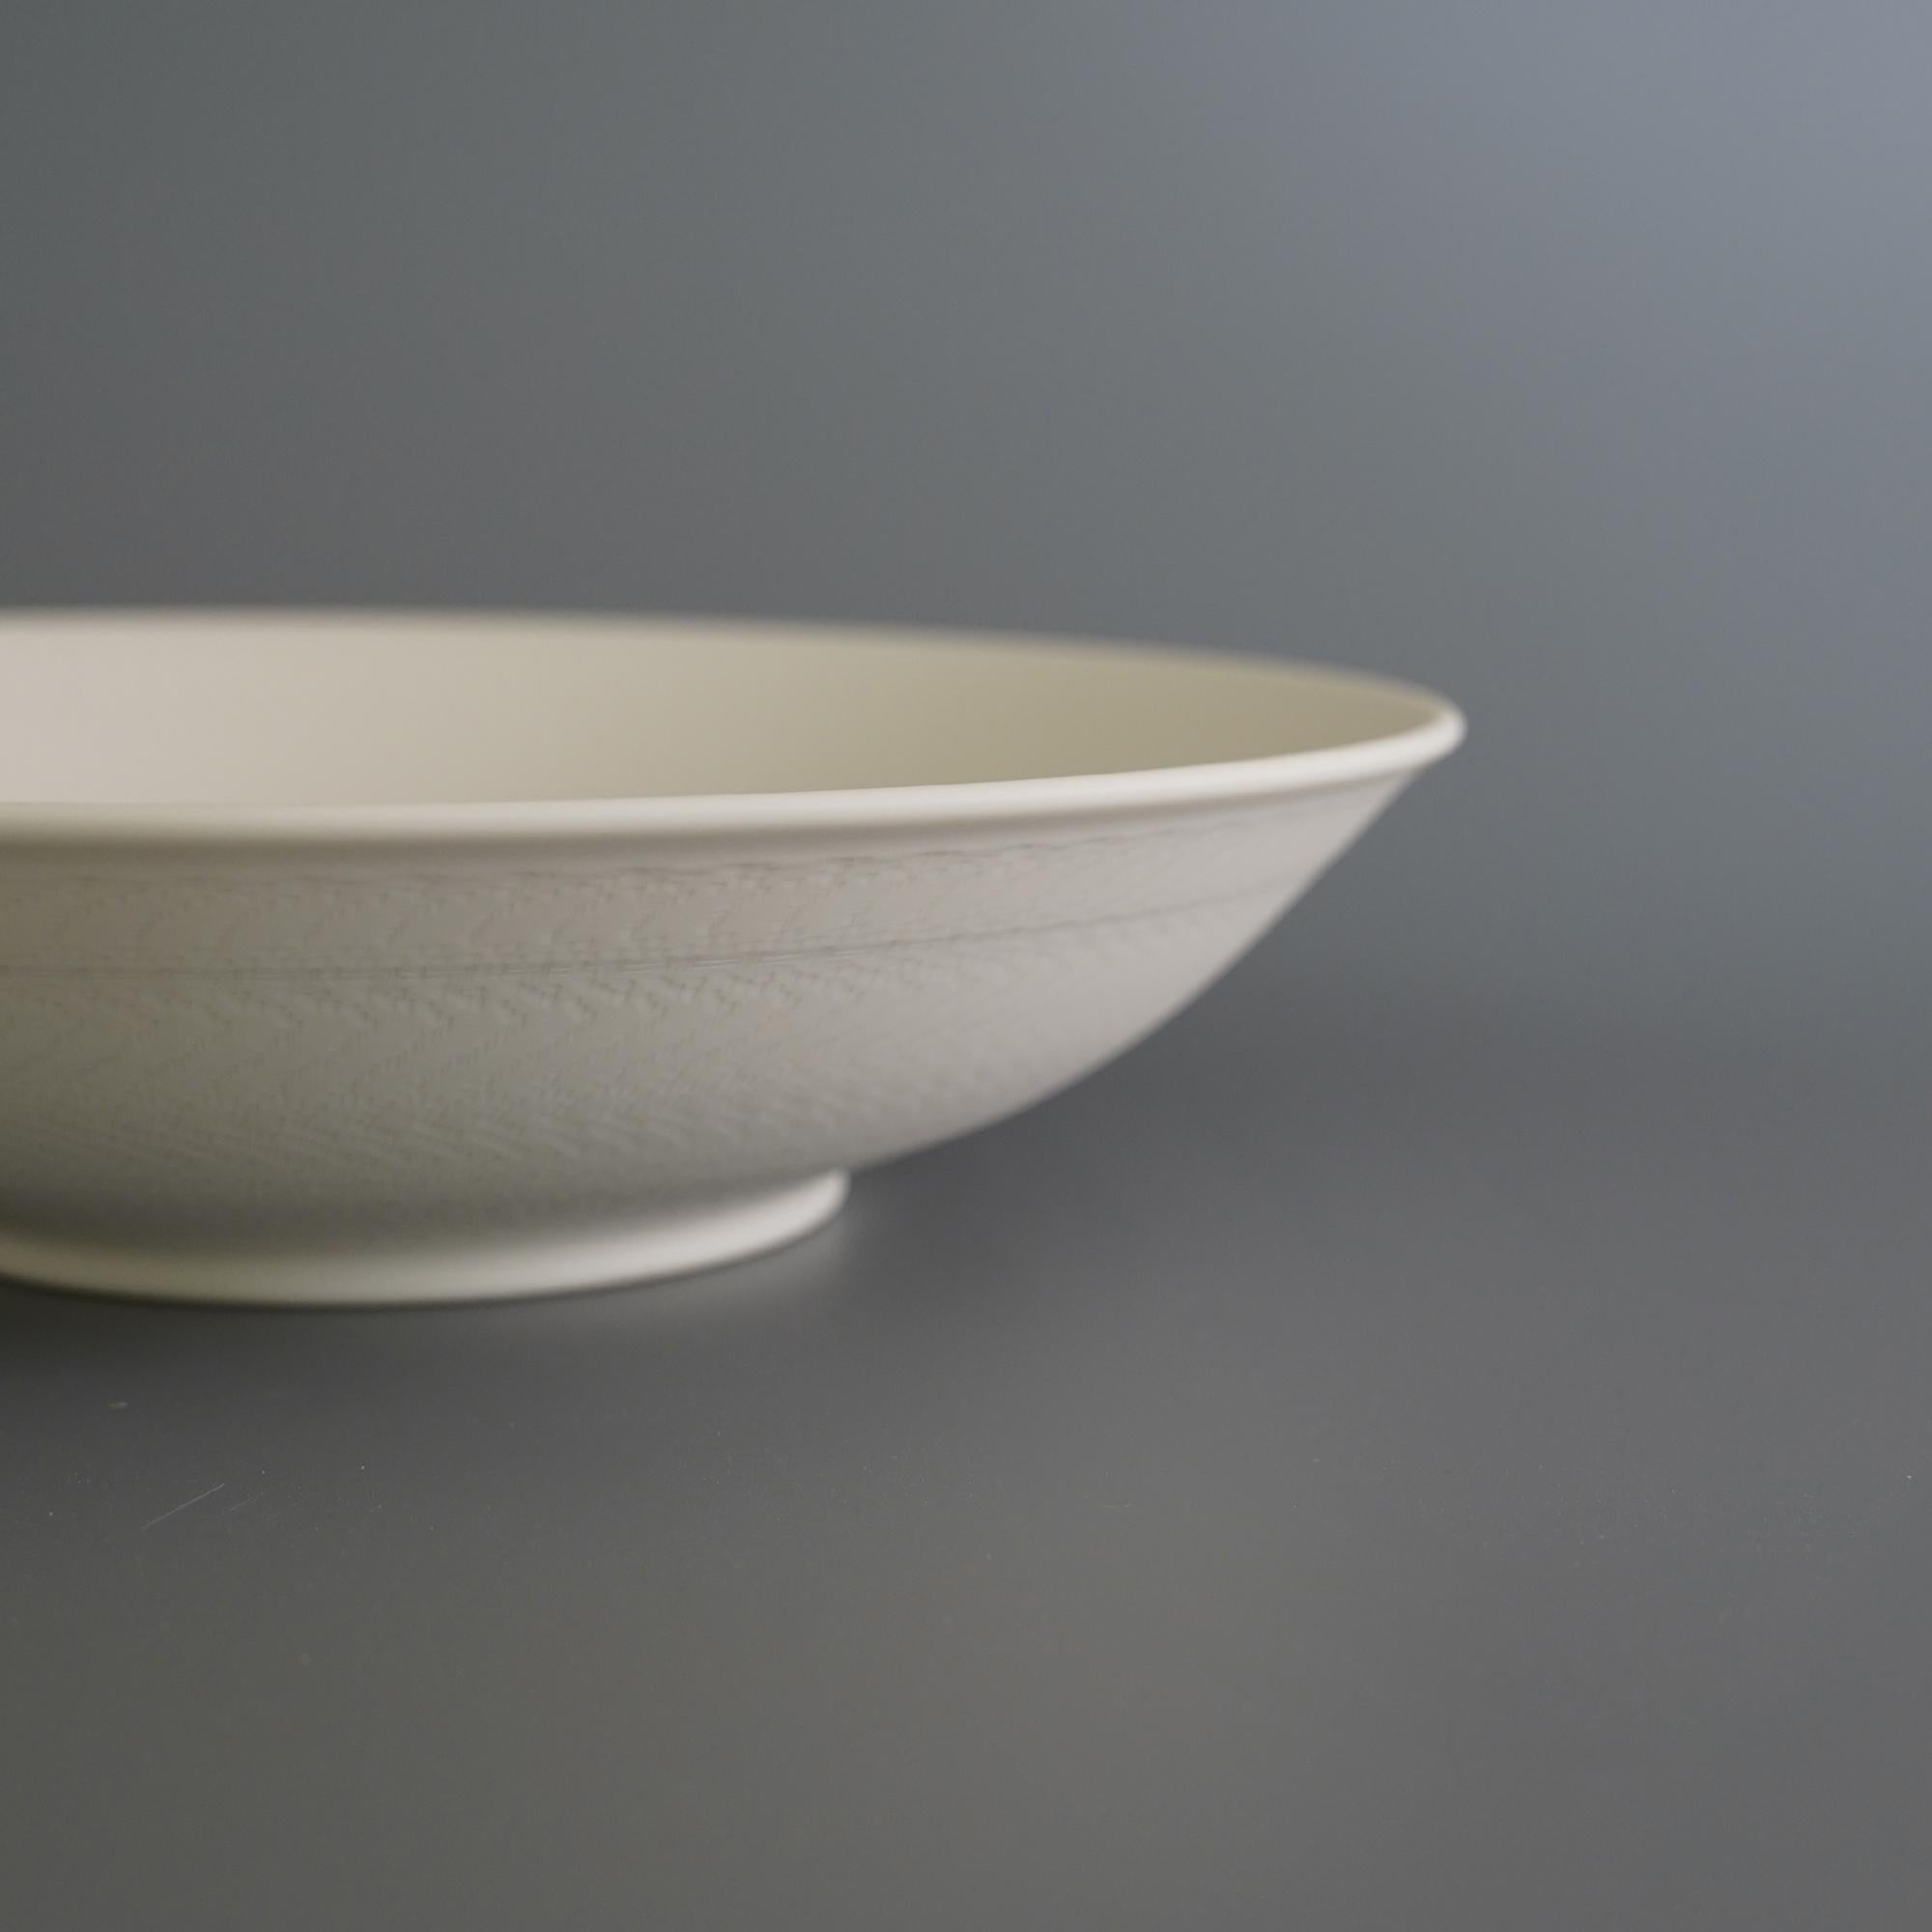 Other Set of 4 Helice Fruit Bowls by Studio Cúze